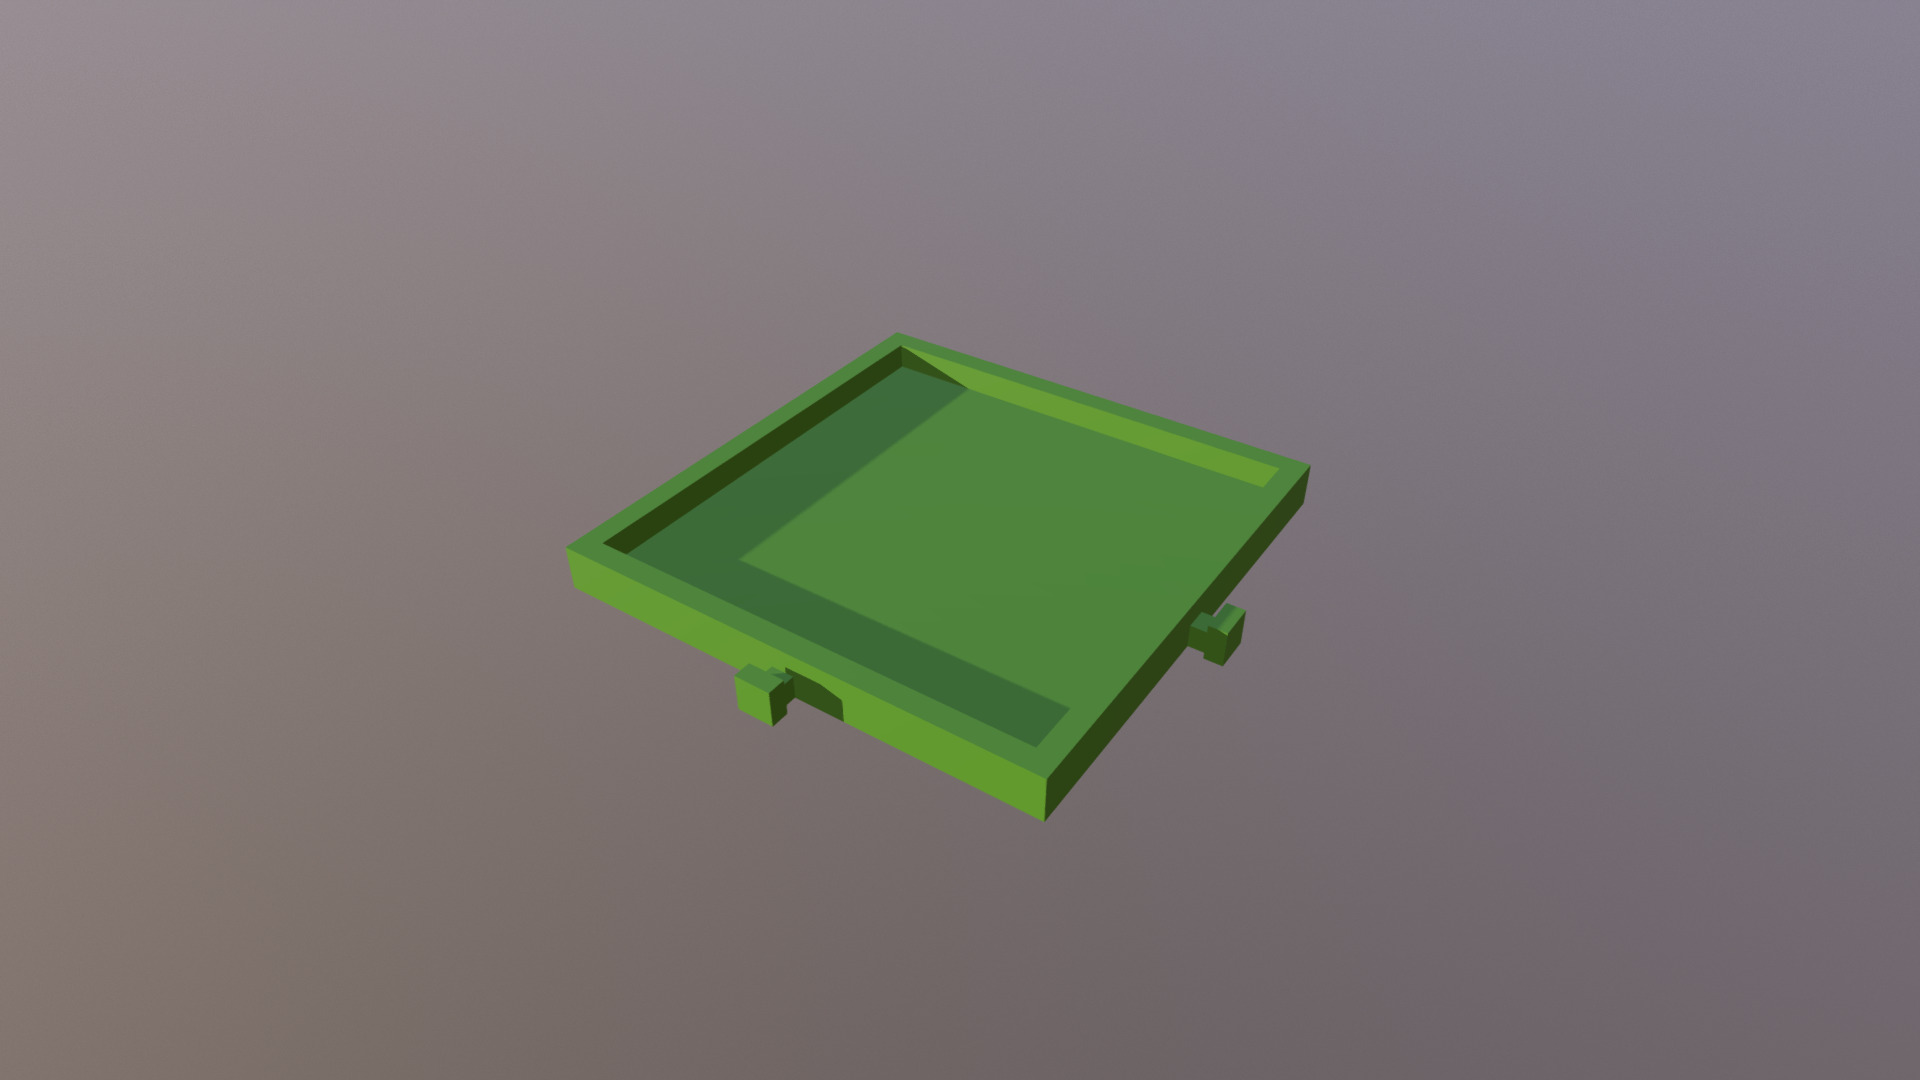 3D model tray – module for organizer - This is a 3D model of the tray - module for organizer. The 3D model is about a green box with a green lid.